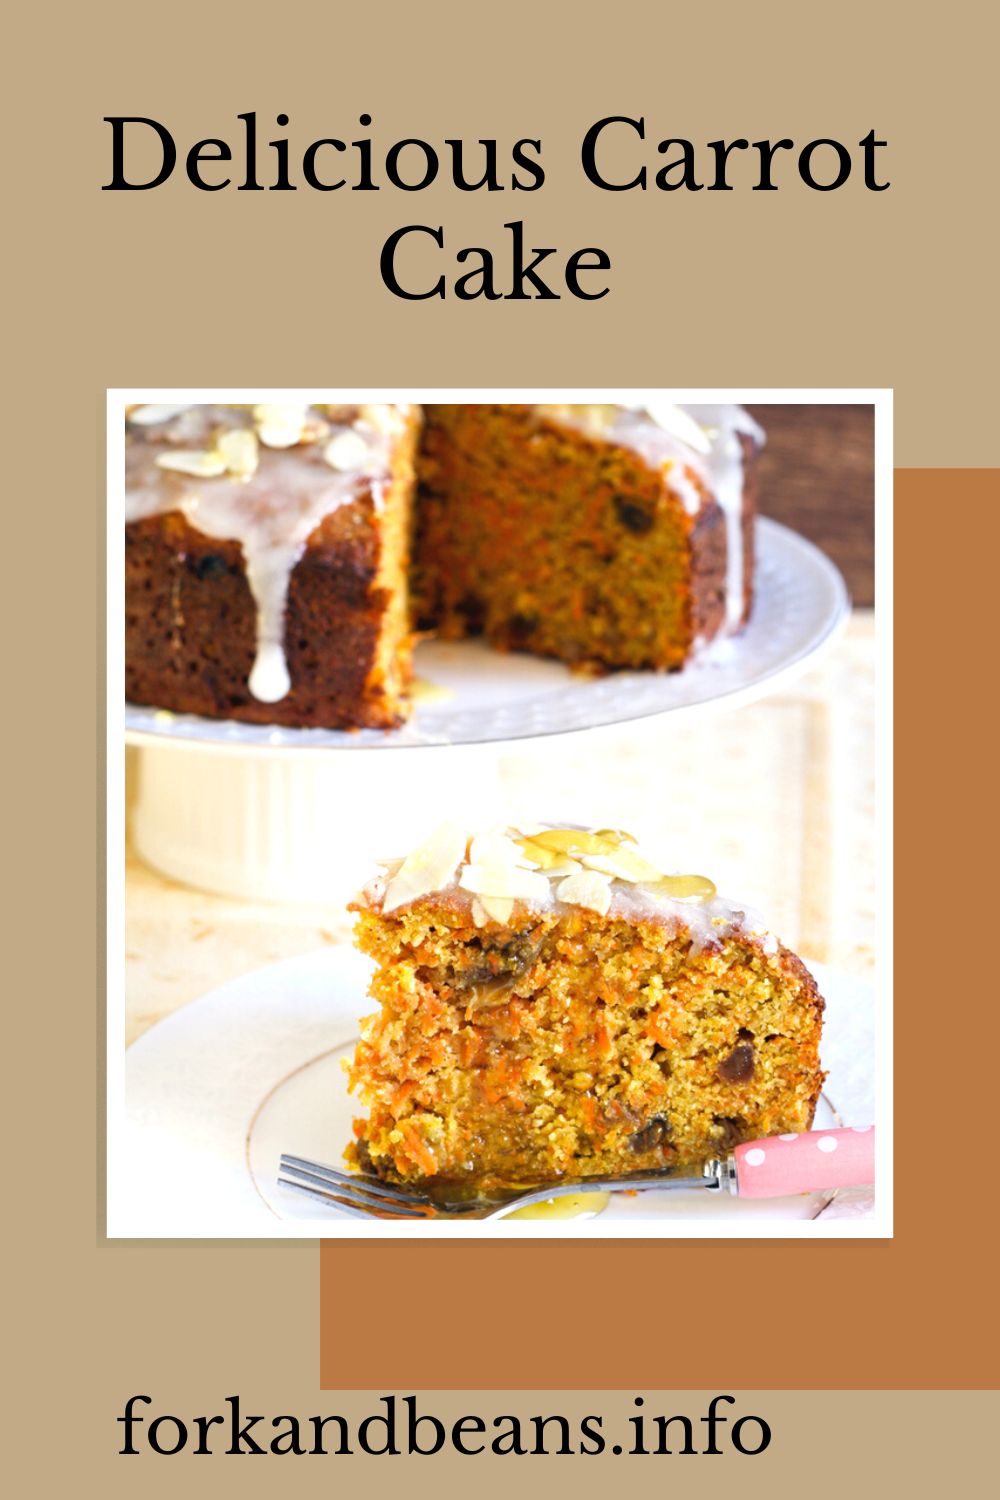 Carrot cake is delicious.